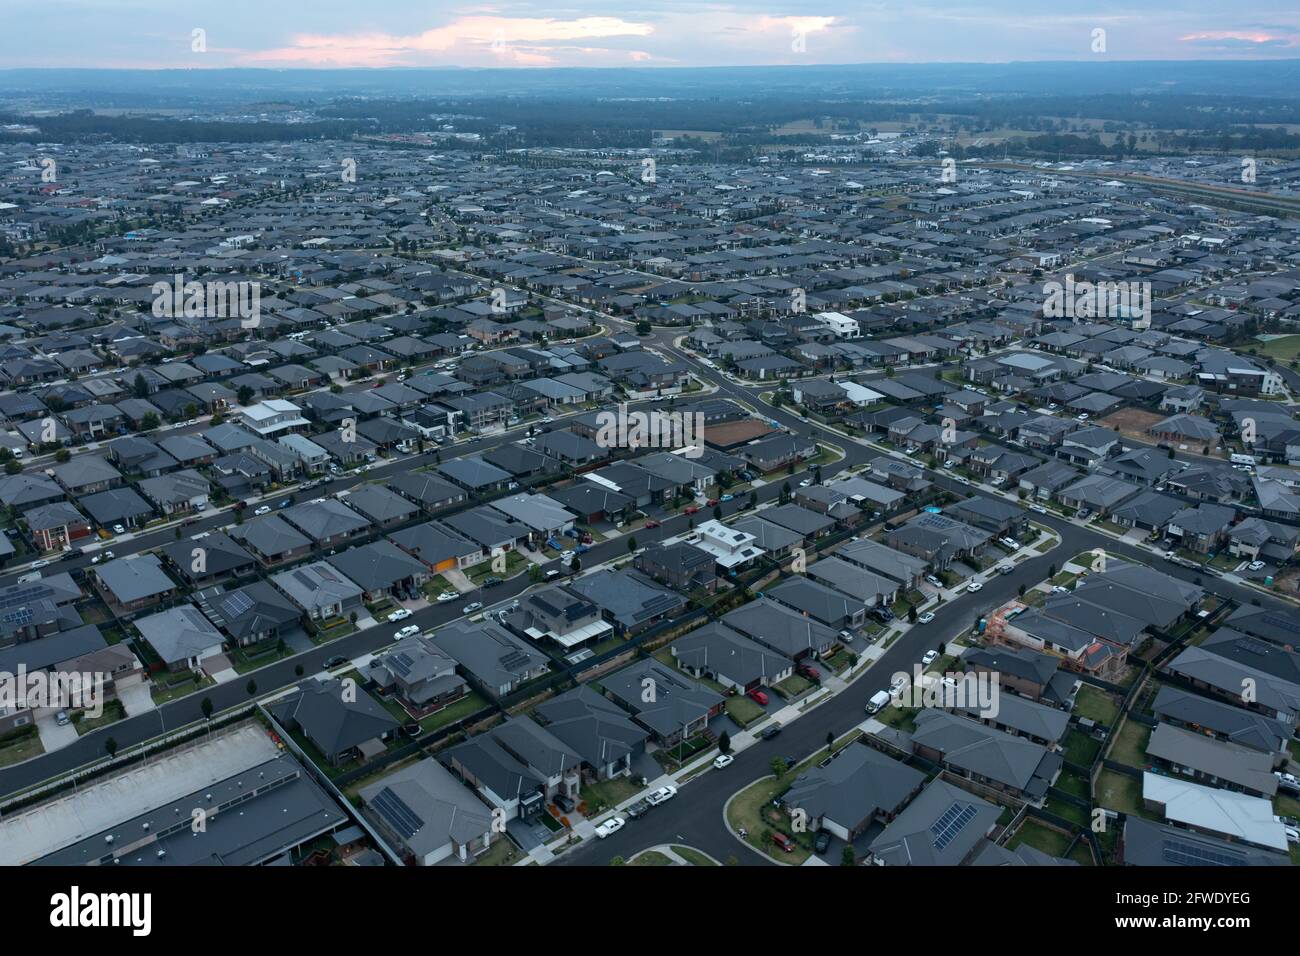 Aerial view of urban sprawl and the rapidly growing south western Sydney suburb of Oran Park. Stock Photo